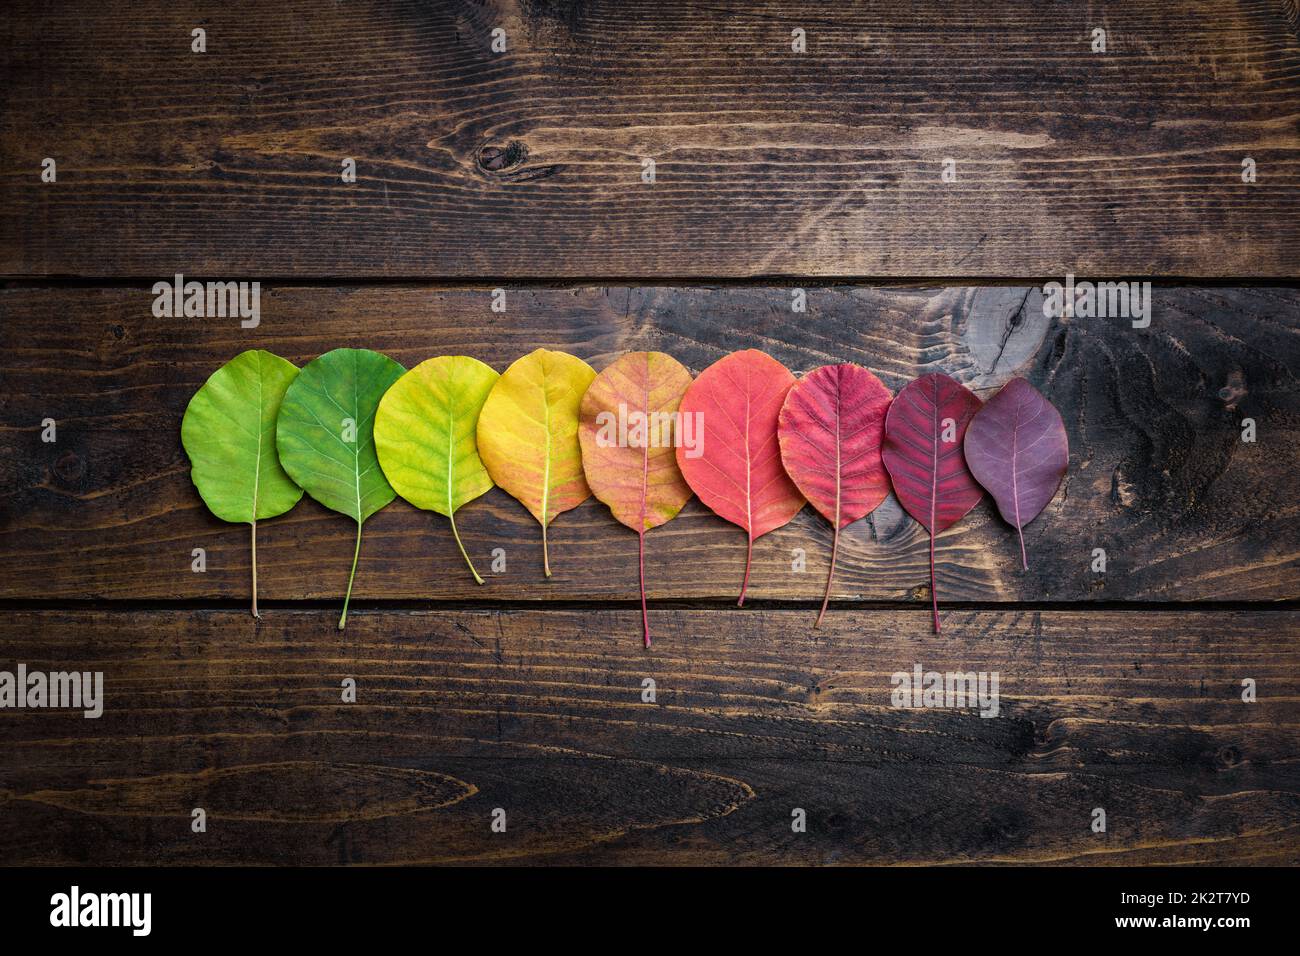 Selection of colorful autunm leaves Stock Photo